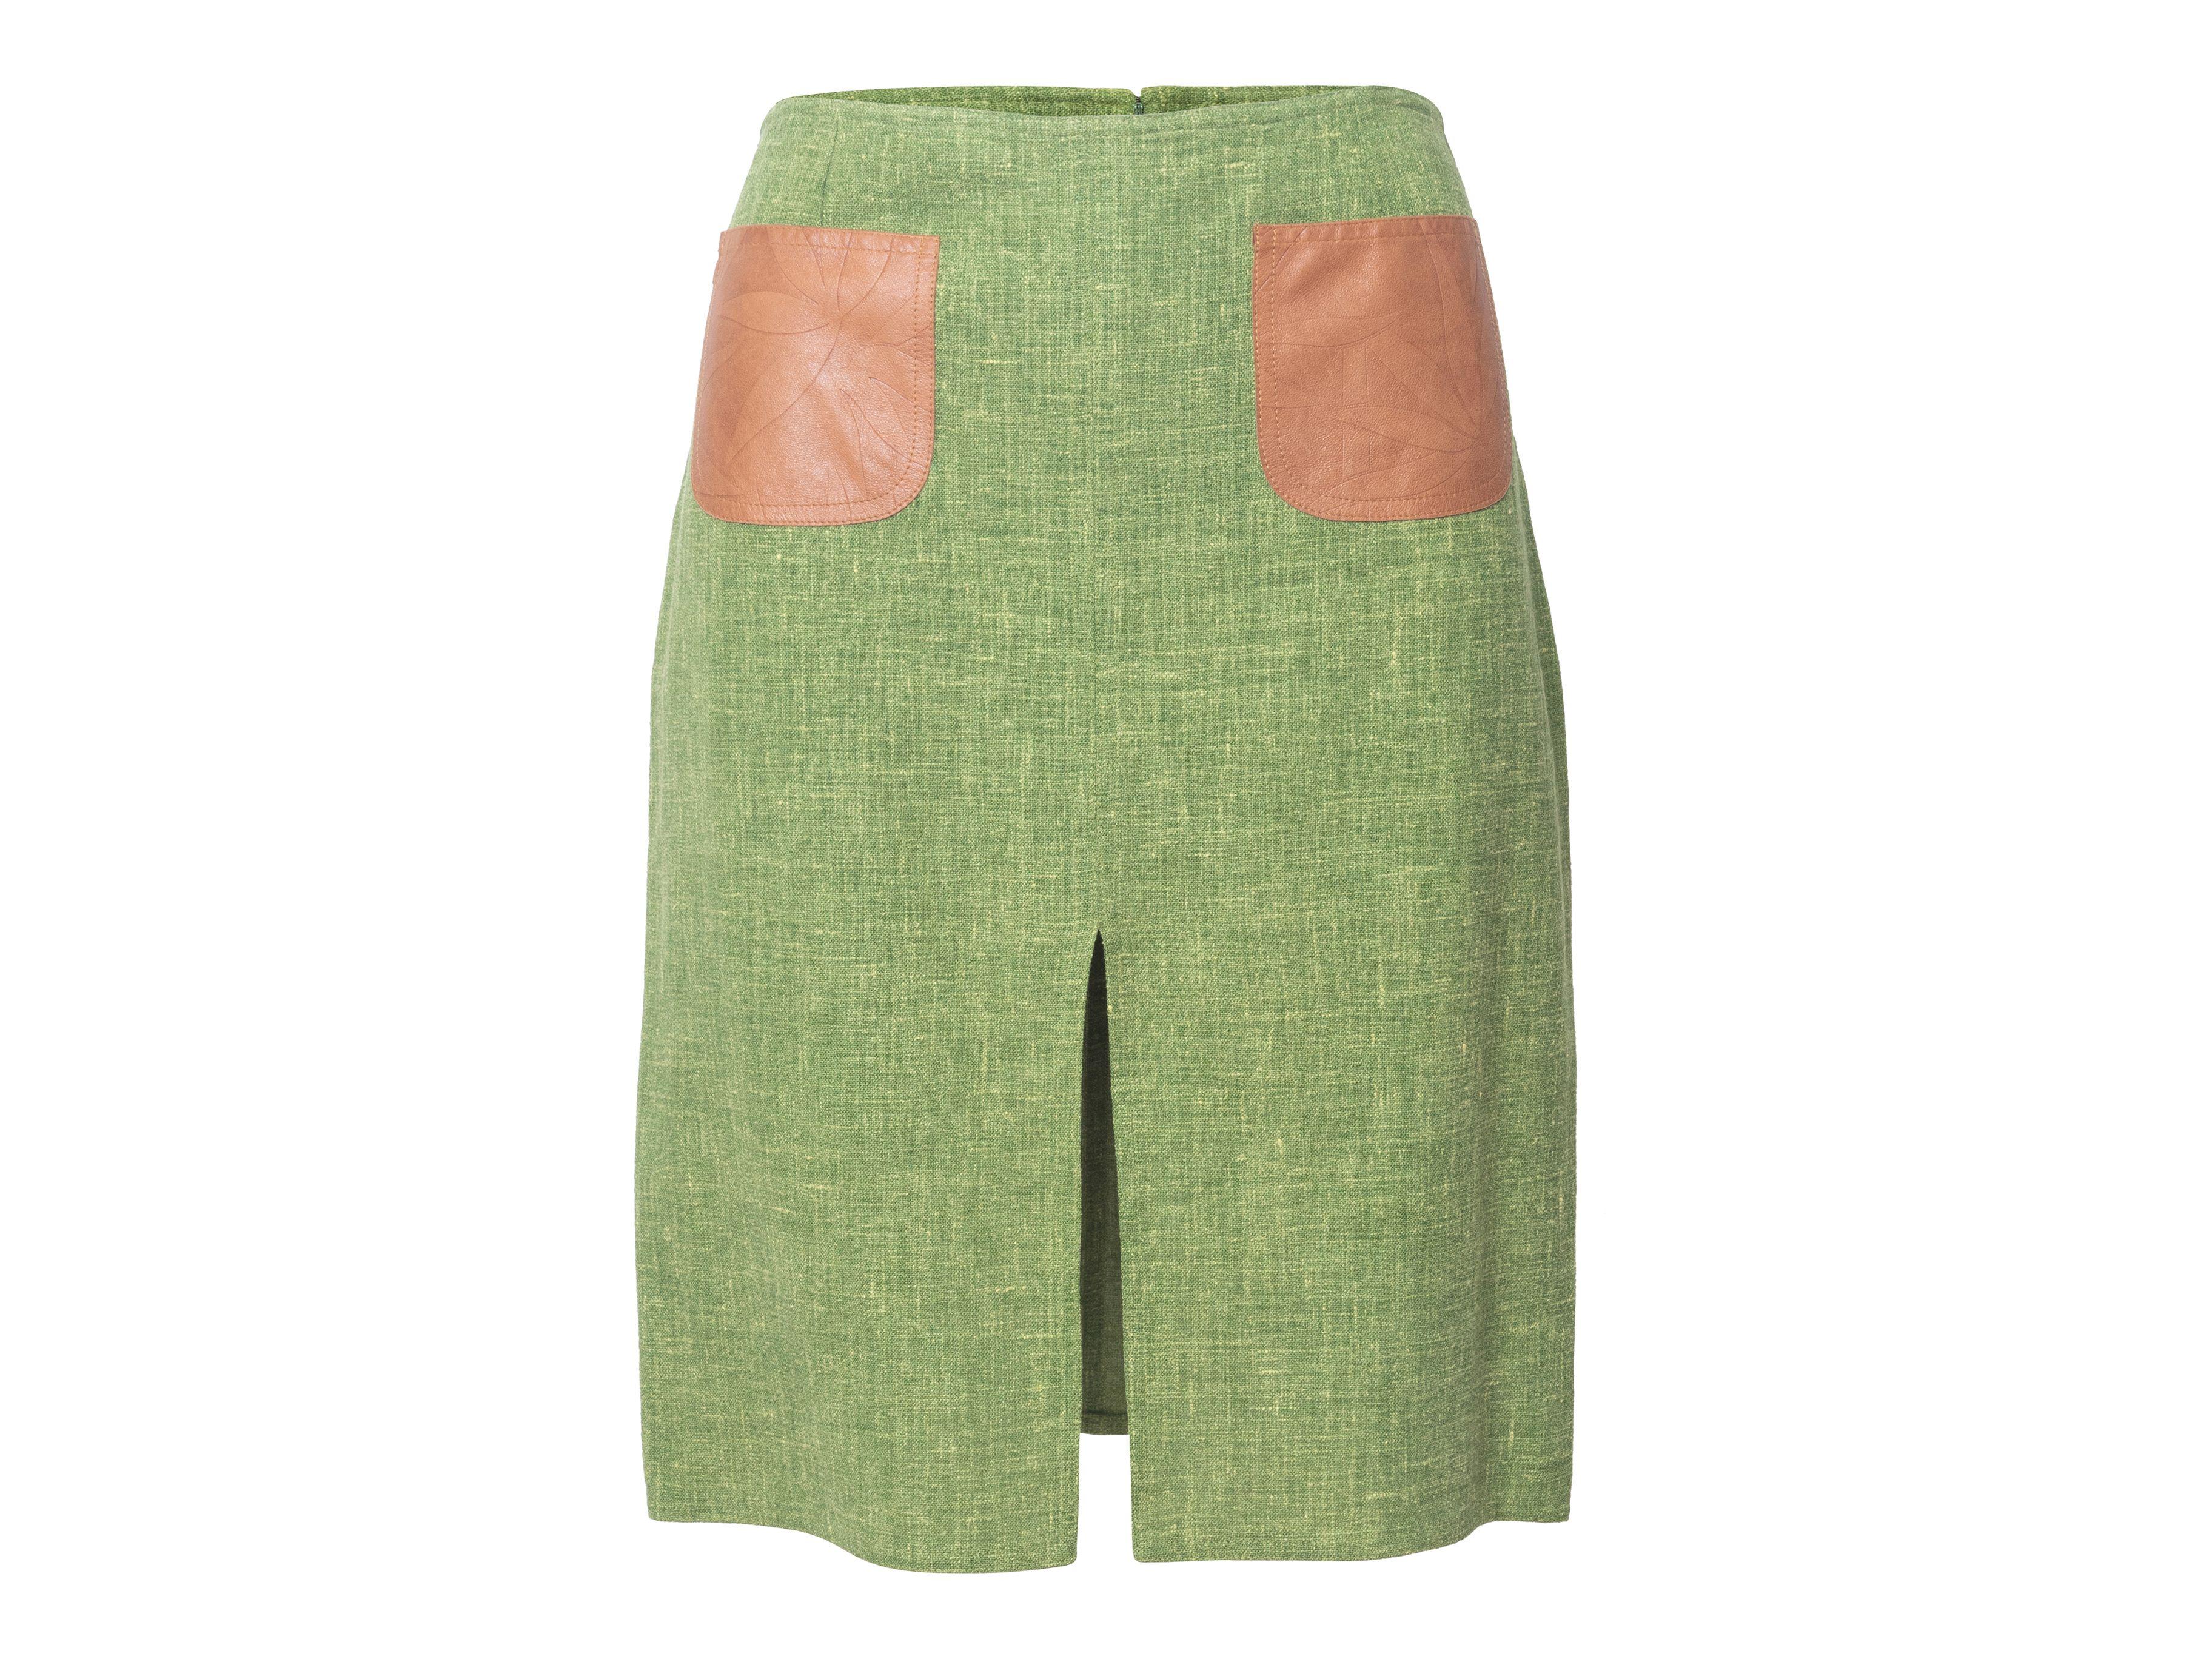 Christian Dior Vintage Green & Tan Linen & Leather Skirt In Good Condition In New York, NY